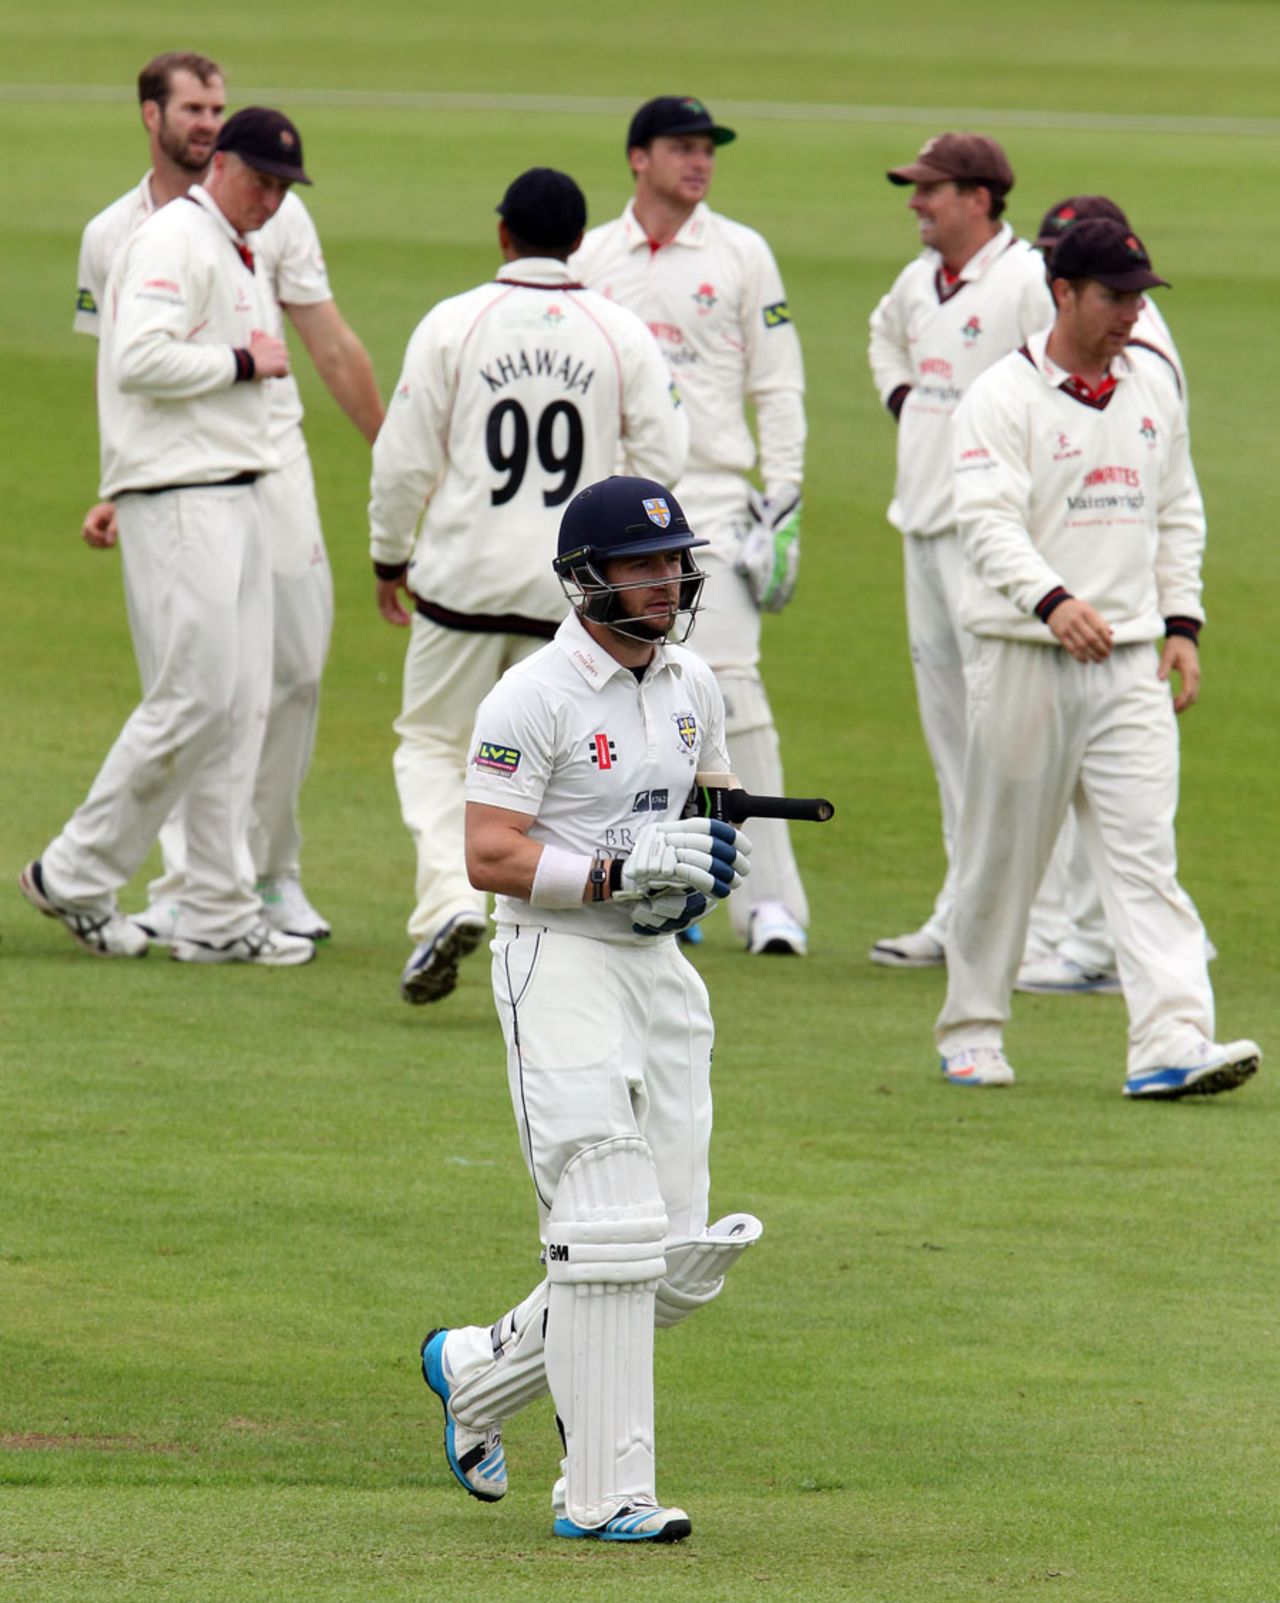 Mark Stoneman fell after making a half-century, Durham v Lancashire, County Championship, Division One, 1st day, Chester-le-Street, June 15, 2014